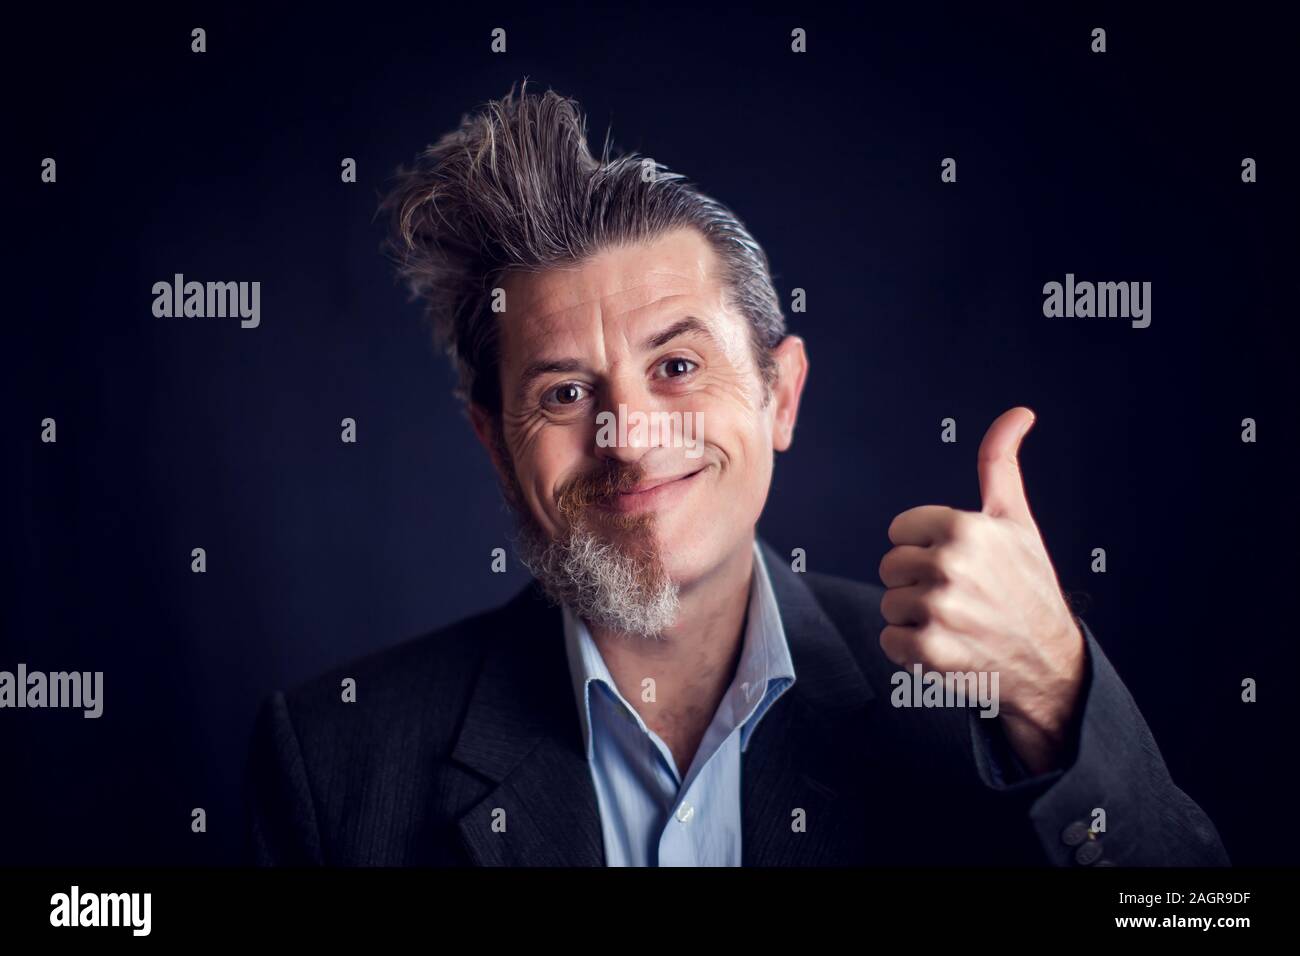 Half bearded funny man wearing suit showing thumb up gesture in front of black background. People and skin care concept Stock Photo